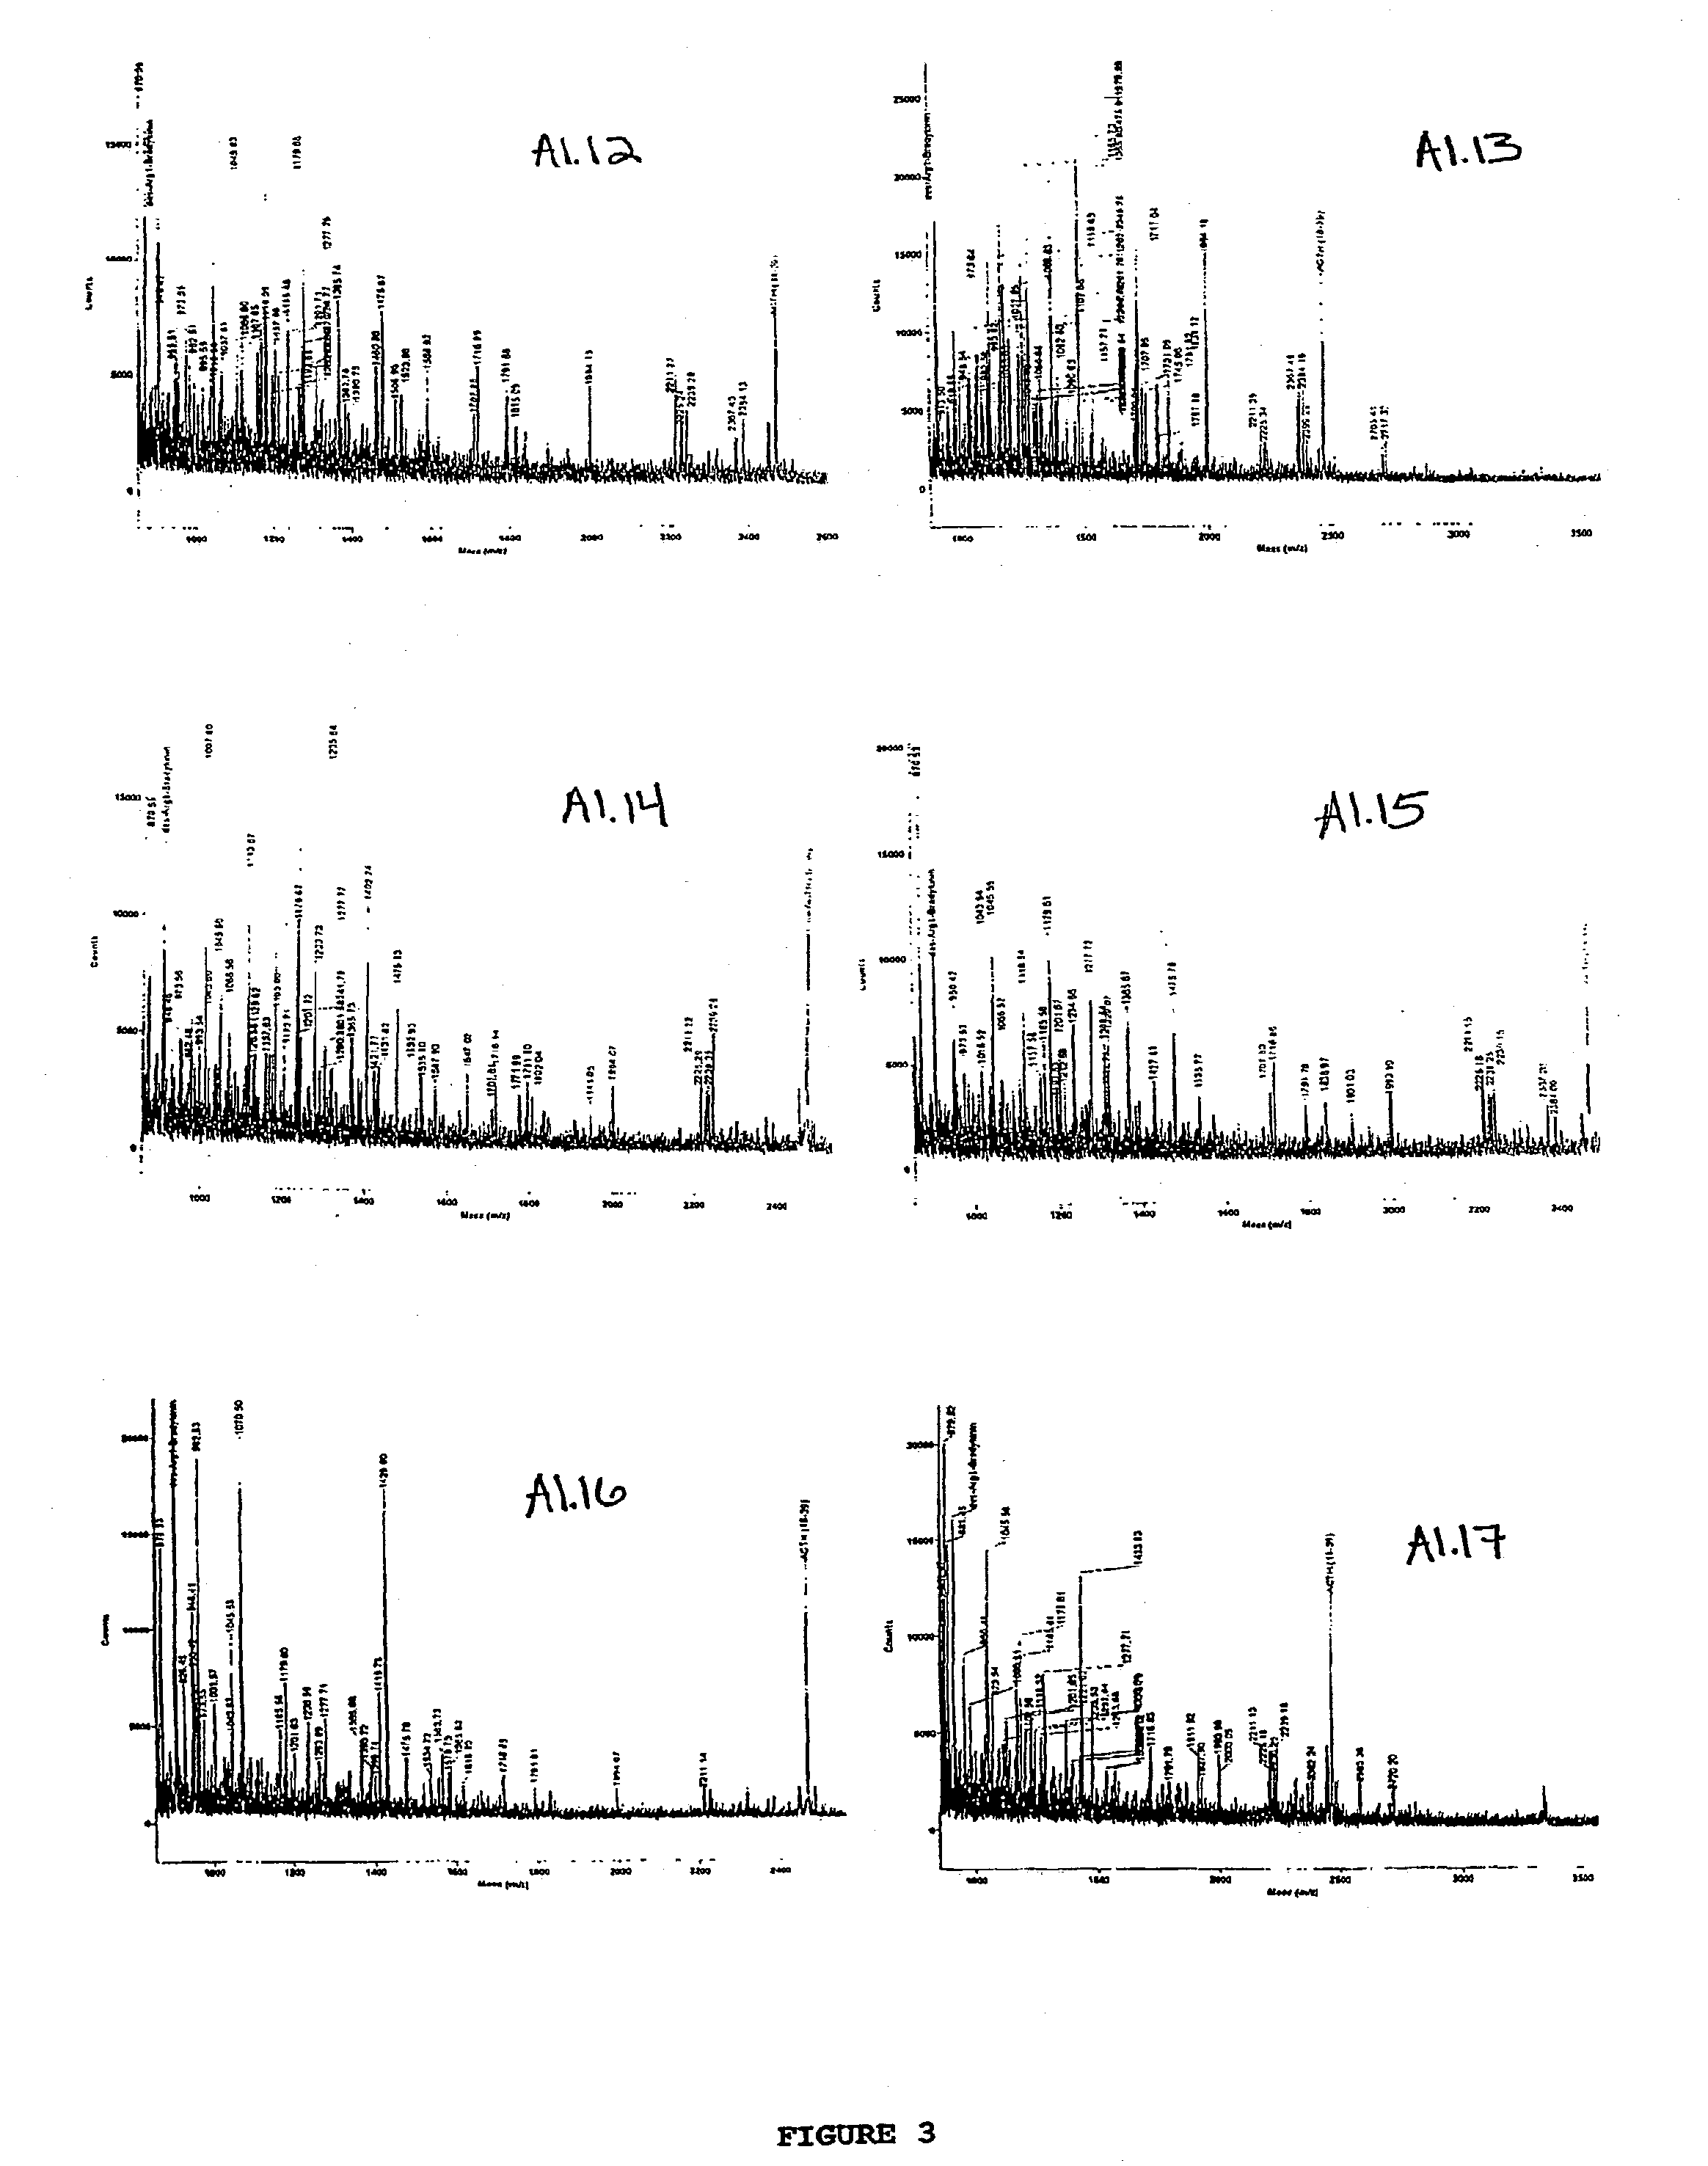 Method for functional mapping of an alzheimer's disease gene network and for identifying therapeutic agents for the treatment of alzheimer' s disease